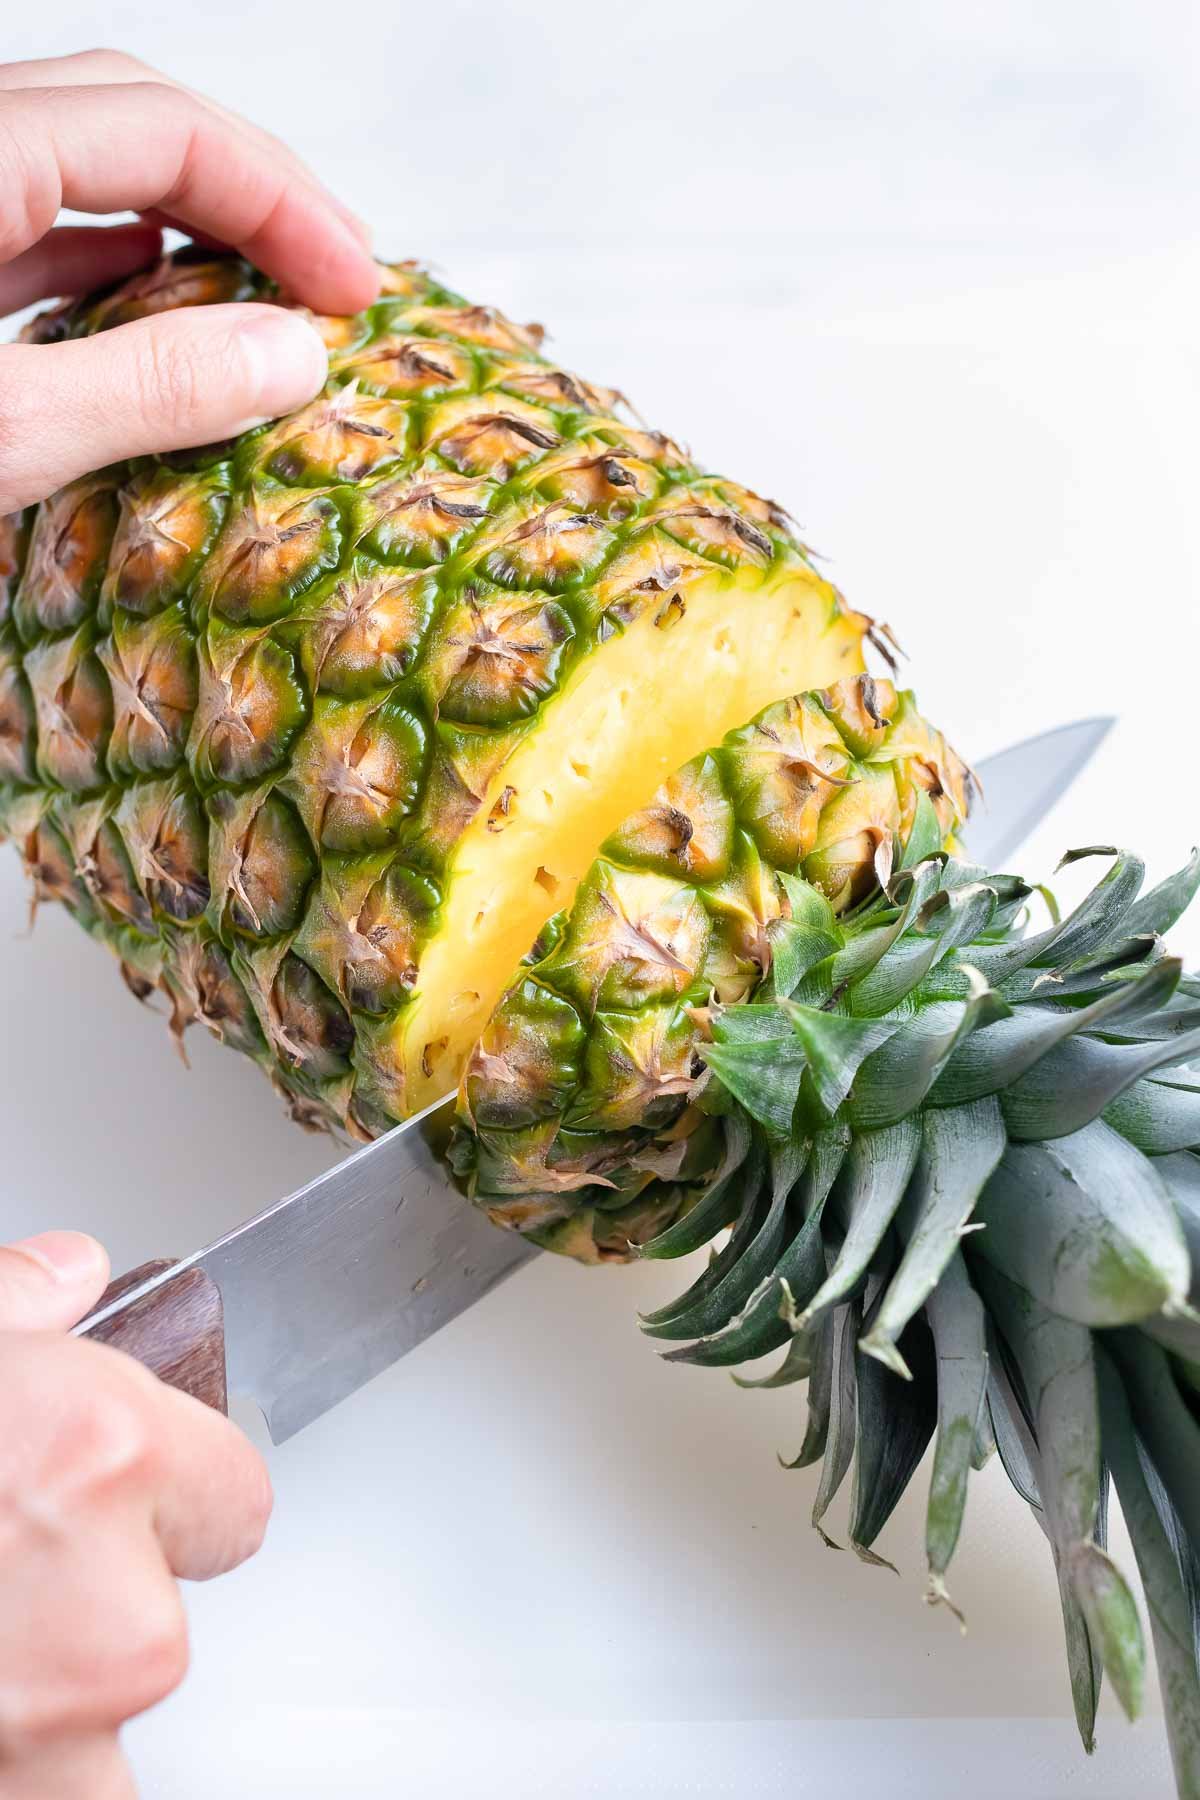 The top is cut off of a whole pineapple.